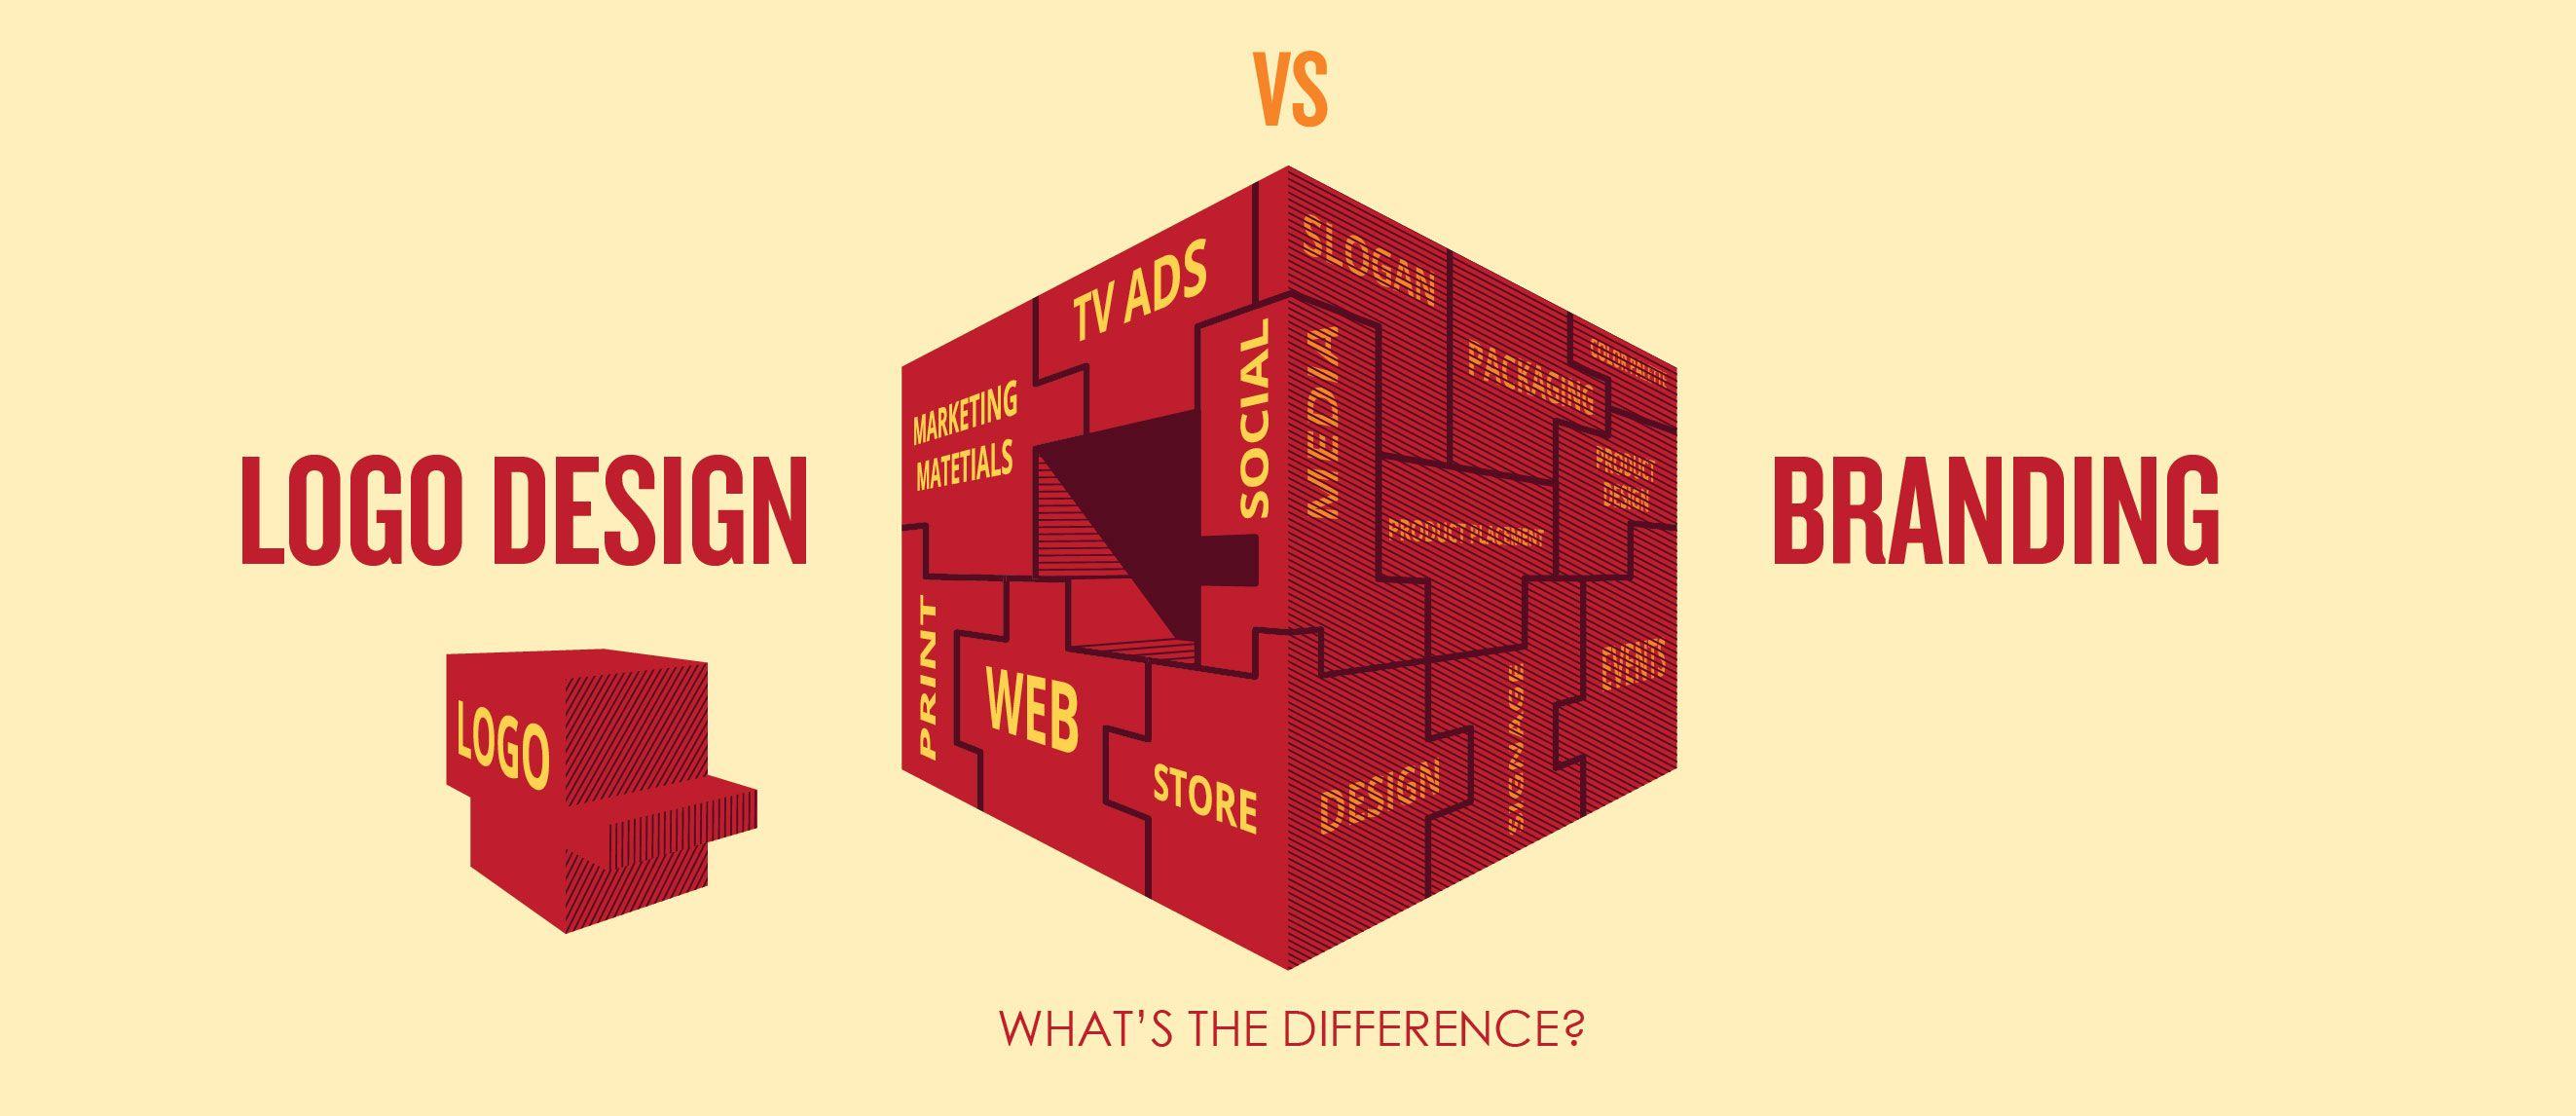 Red vs Logo - What's the Difference Between Logo Design and Branding?